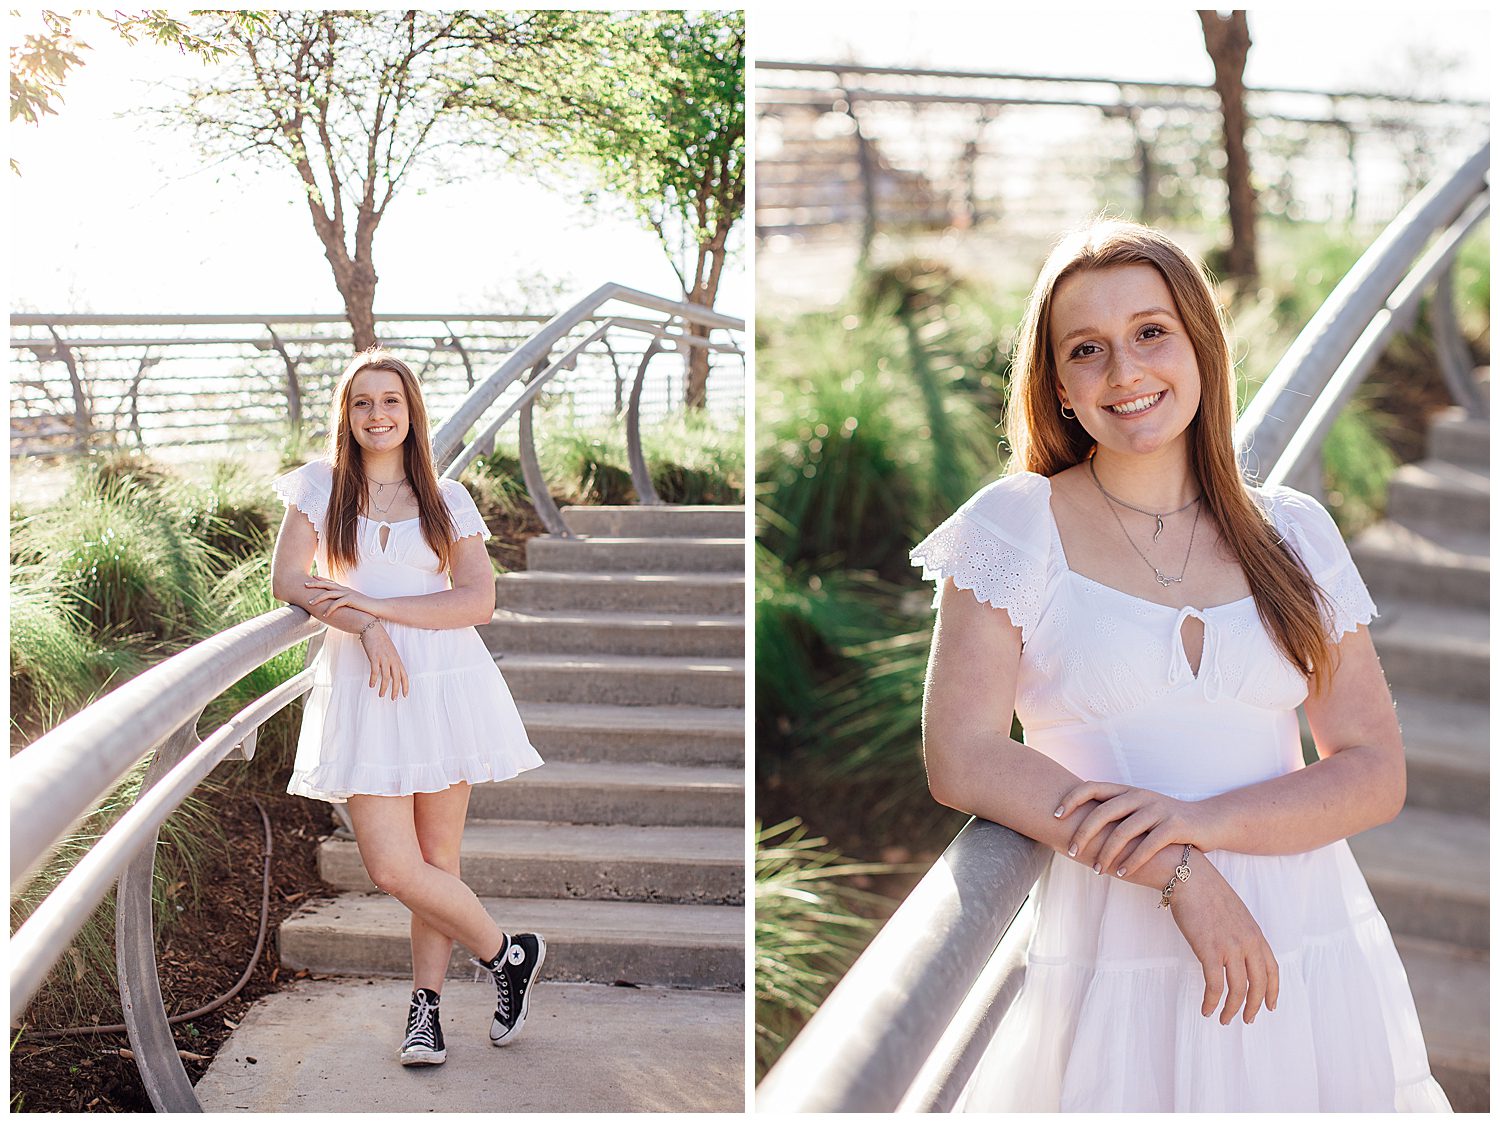 High school senior girl in black converse and white dress leaning on stair rail downtown Houston